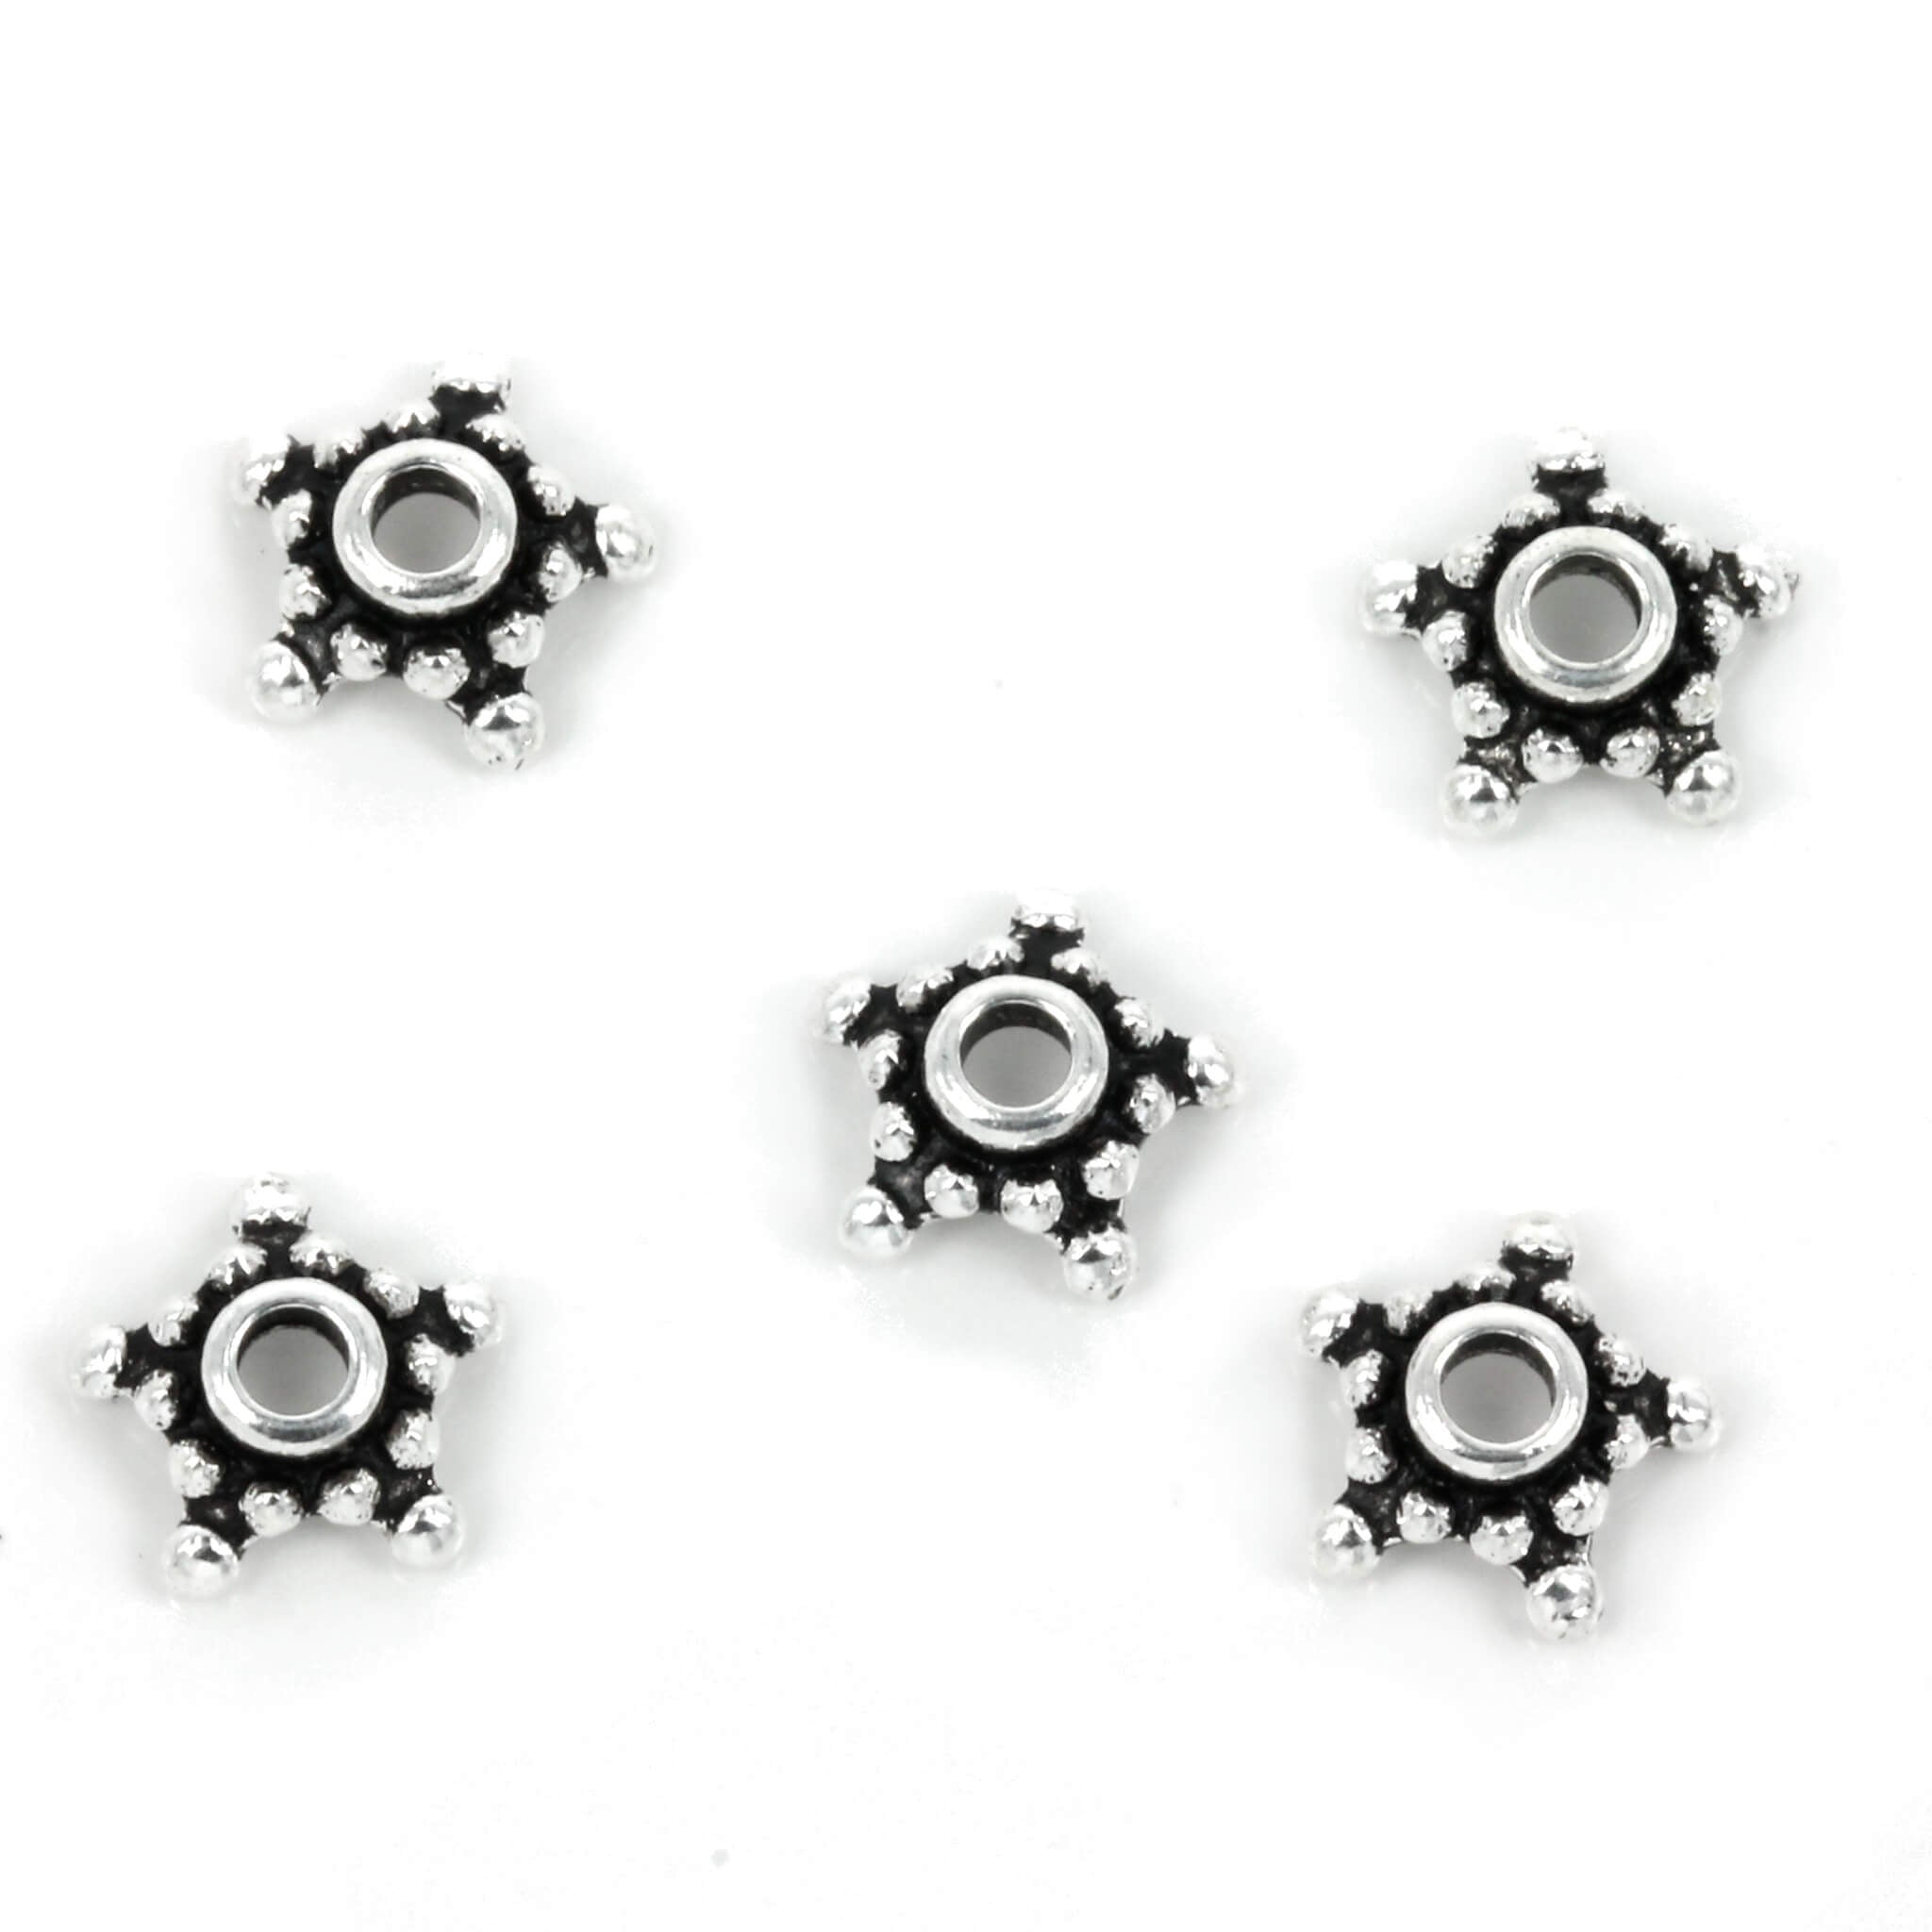 Bali-Style Star Granulation Bead Caps in Sterling Silver 8mm